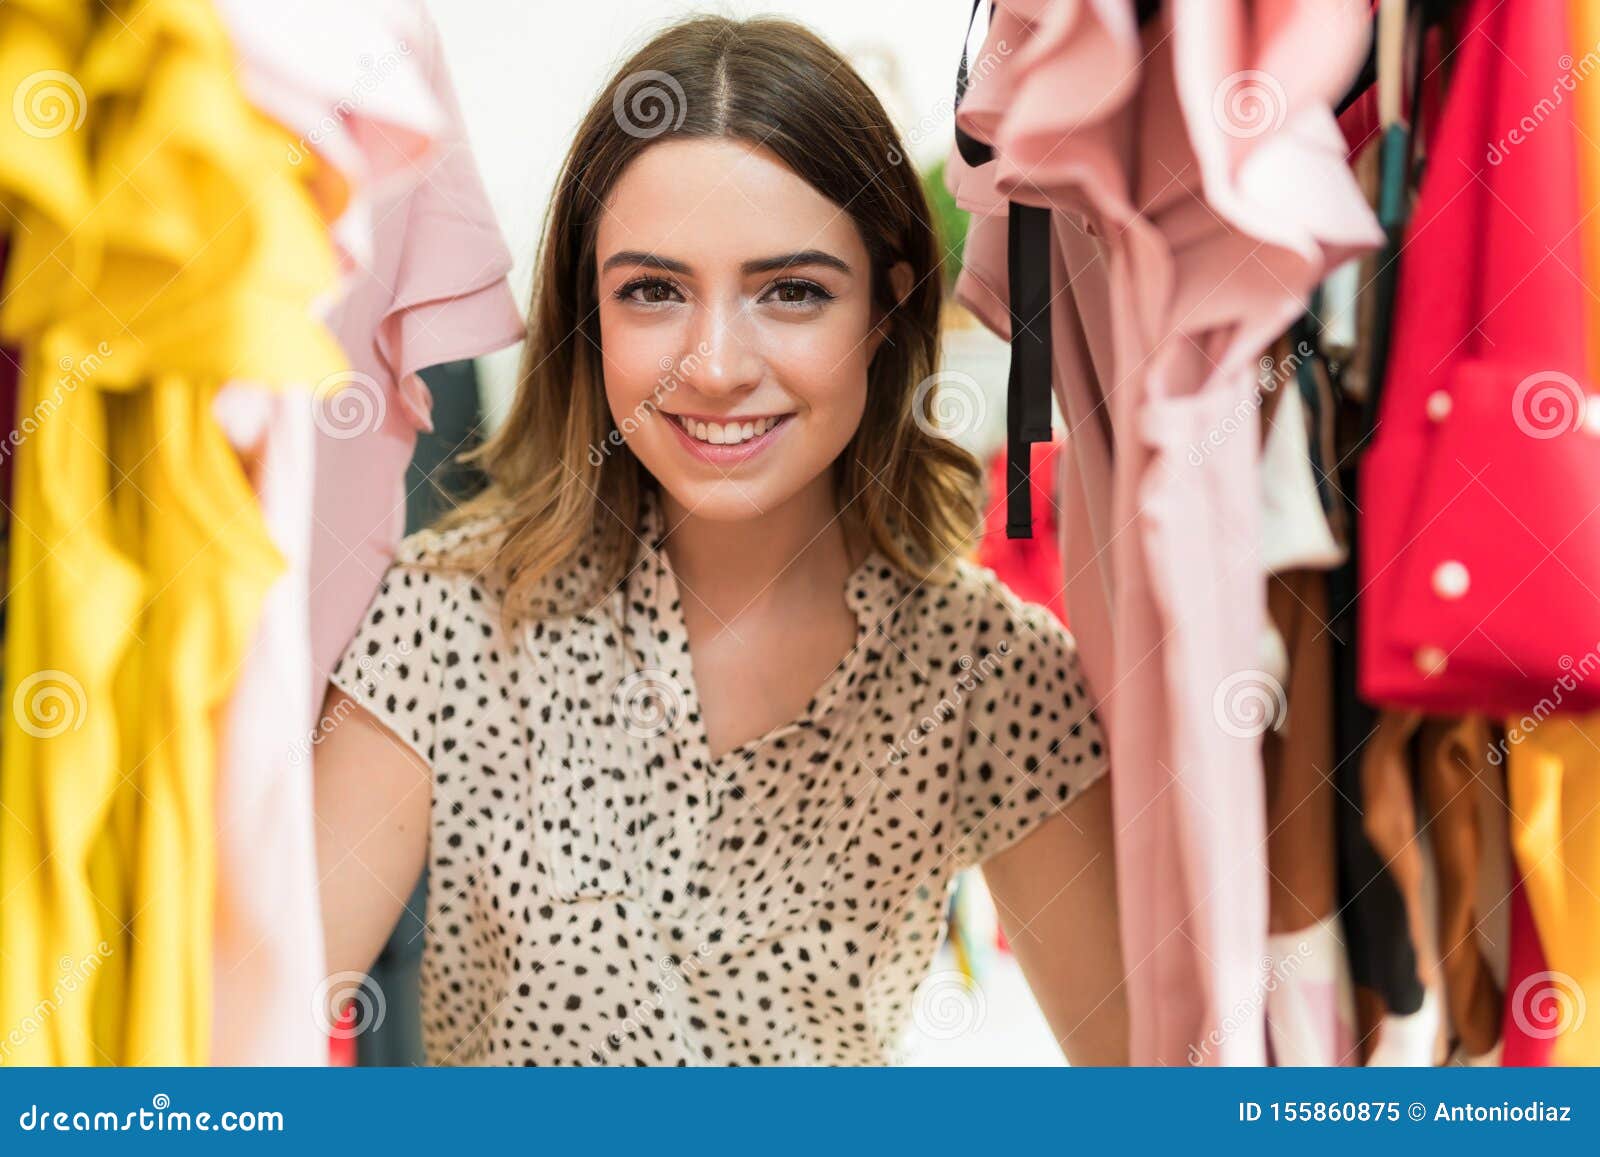 Smiling Young Female Customer Shopping in Mall Stock Image - Image of ...